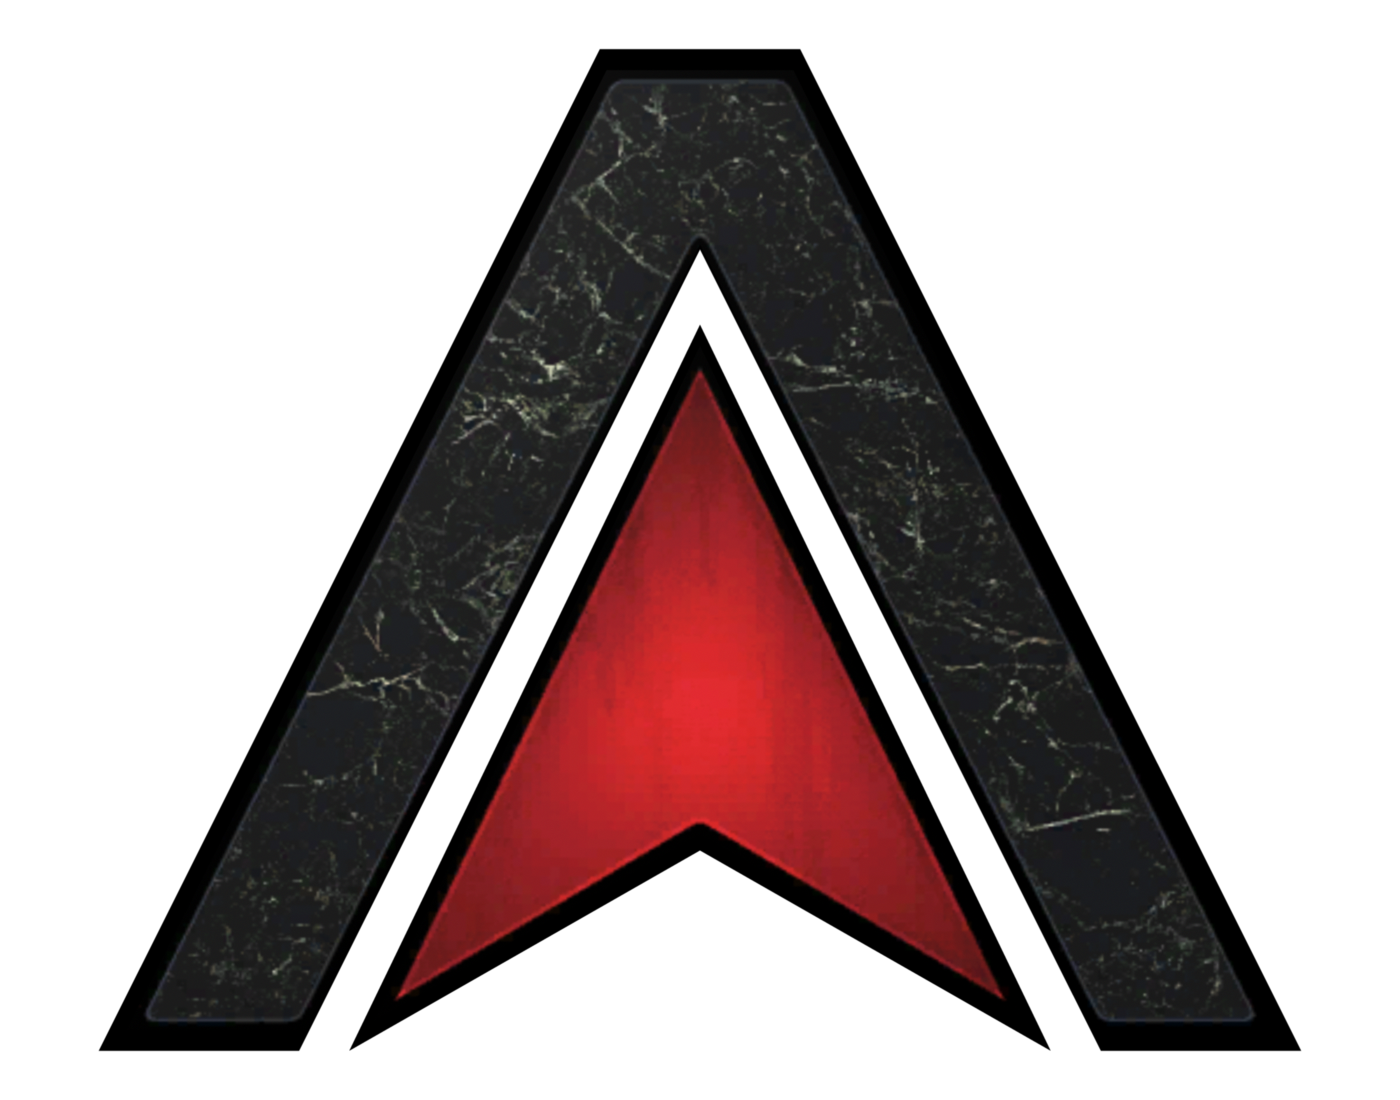 Call Of Duty Atlas Png & Free Call Of Duty Atlas.png Transparent Image